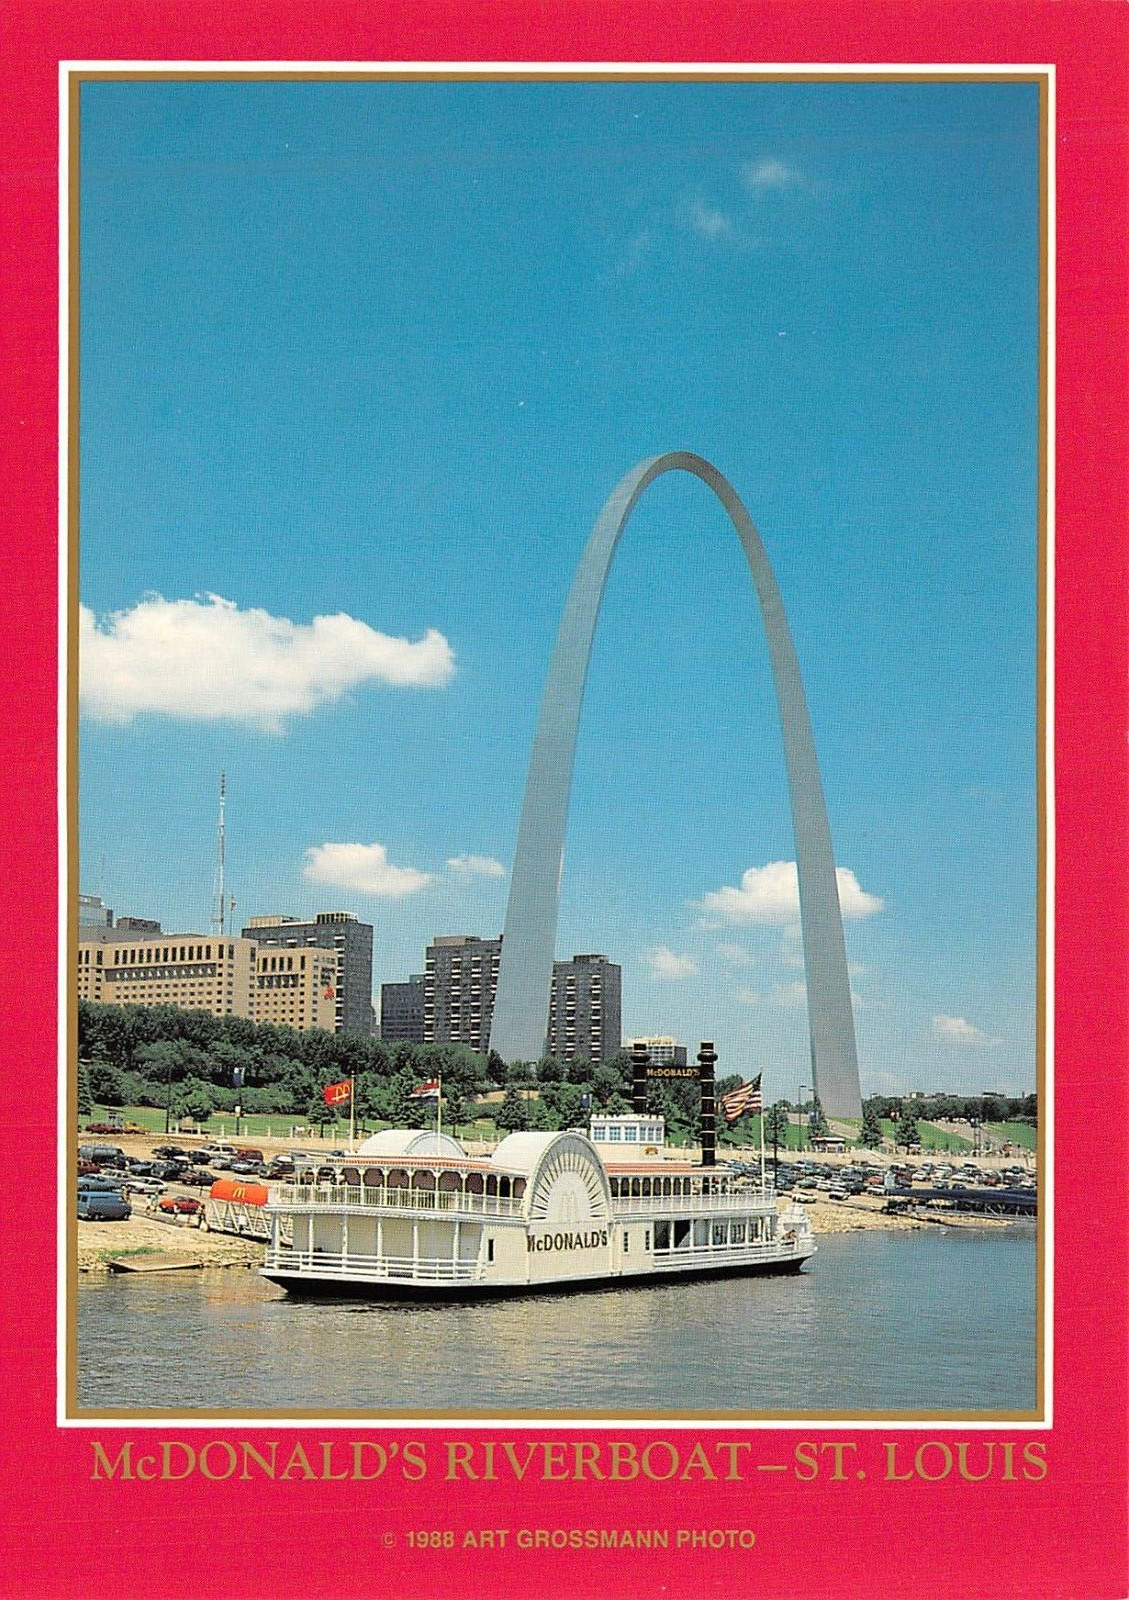 McDonald's paddleboat in St. Louis, MO